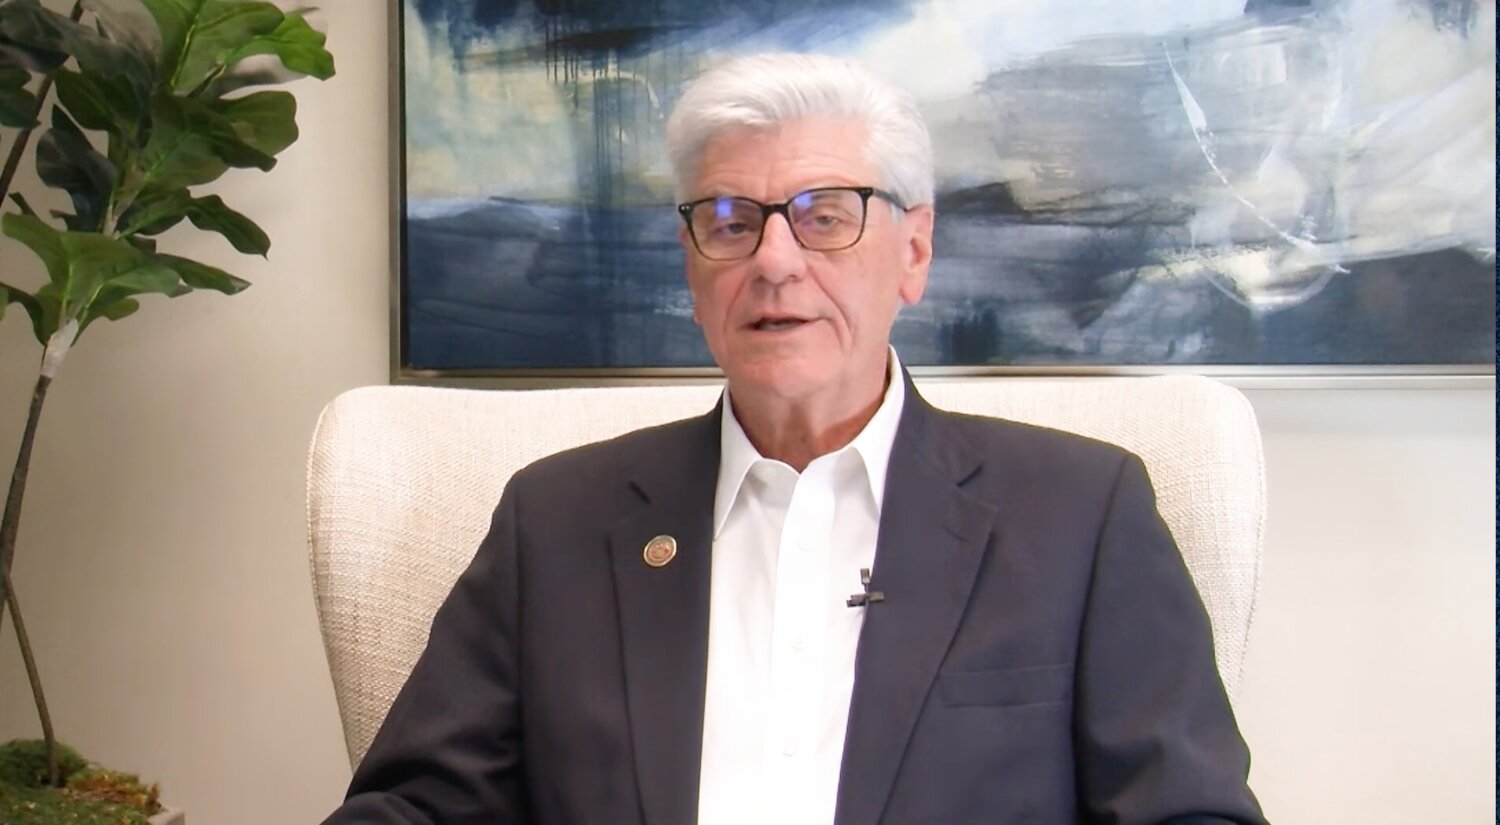 Having been unfairly targeted by leftwing news media in a massive welfare fraud scandal, he actually helped uncover in 2019, Former Gov. Phil Bryant declared his innocence Thursday with the release of documents and a video.